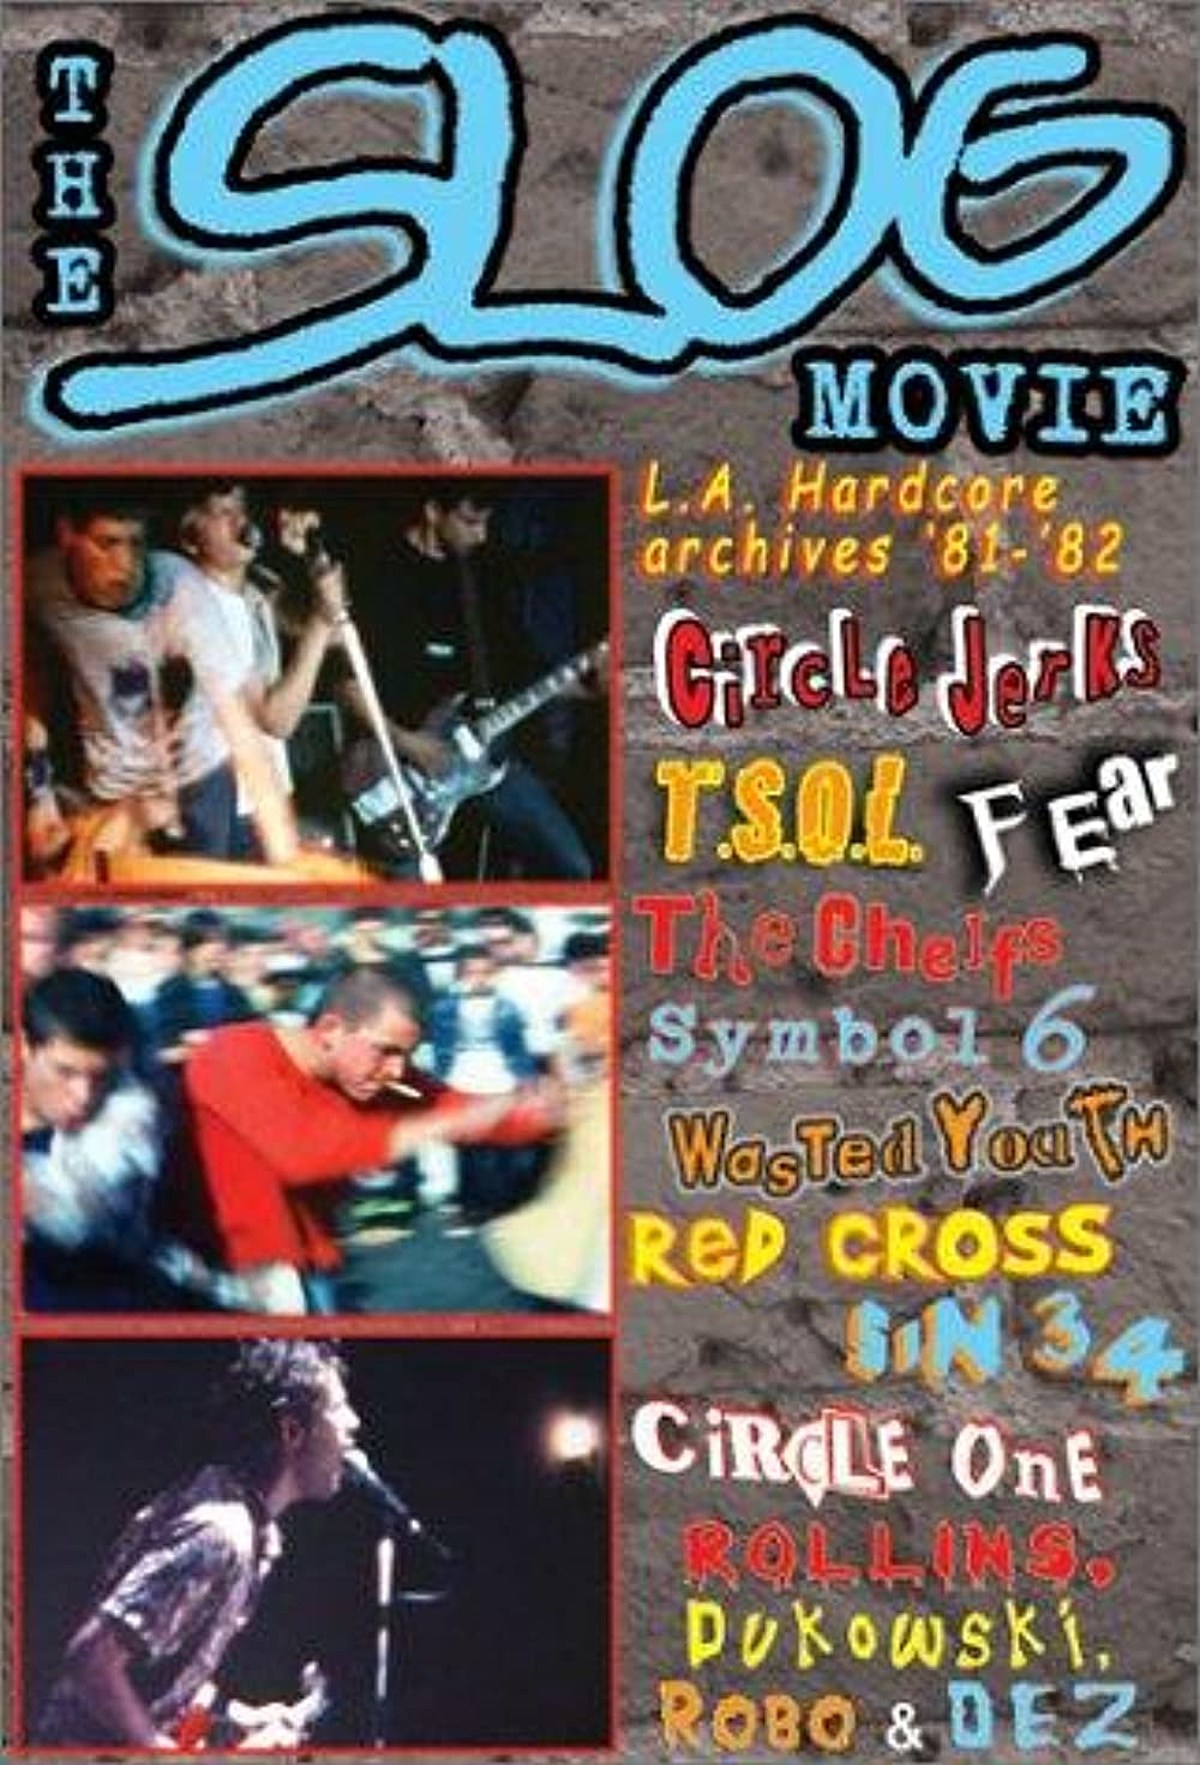 Classic punk movie screening in NY in honor of new SST book (Q&A with special guests included)